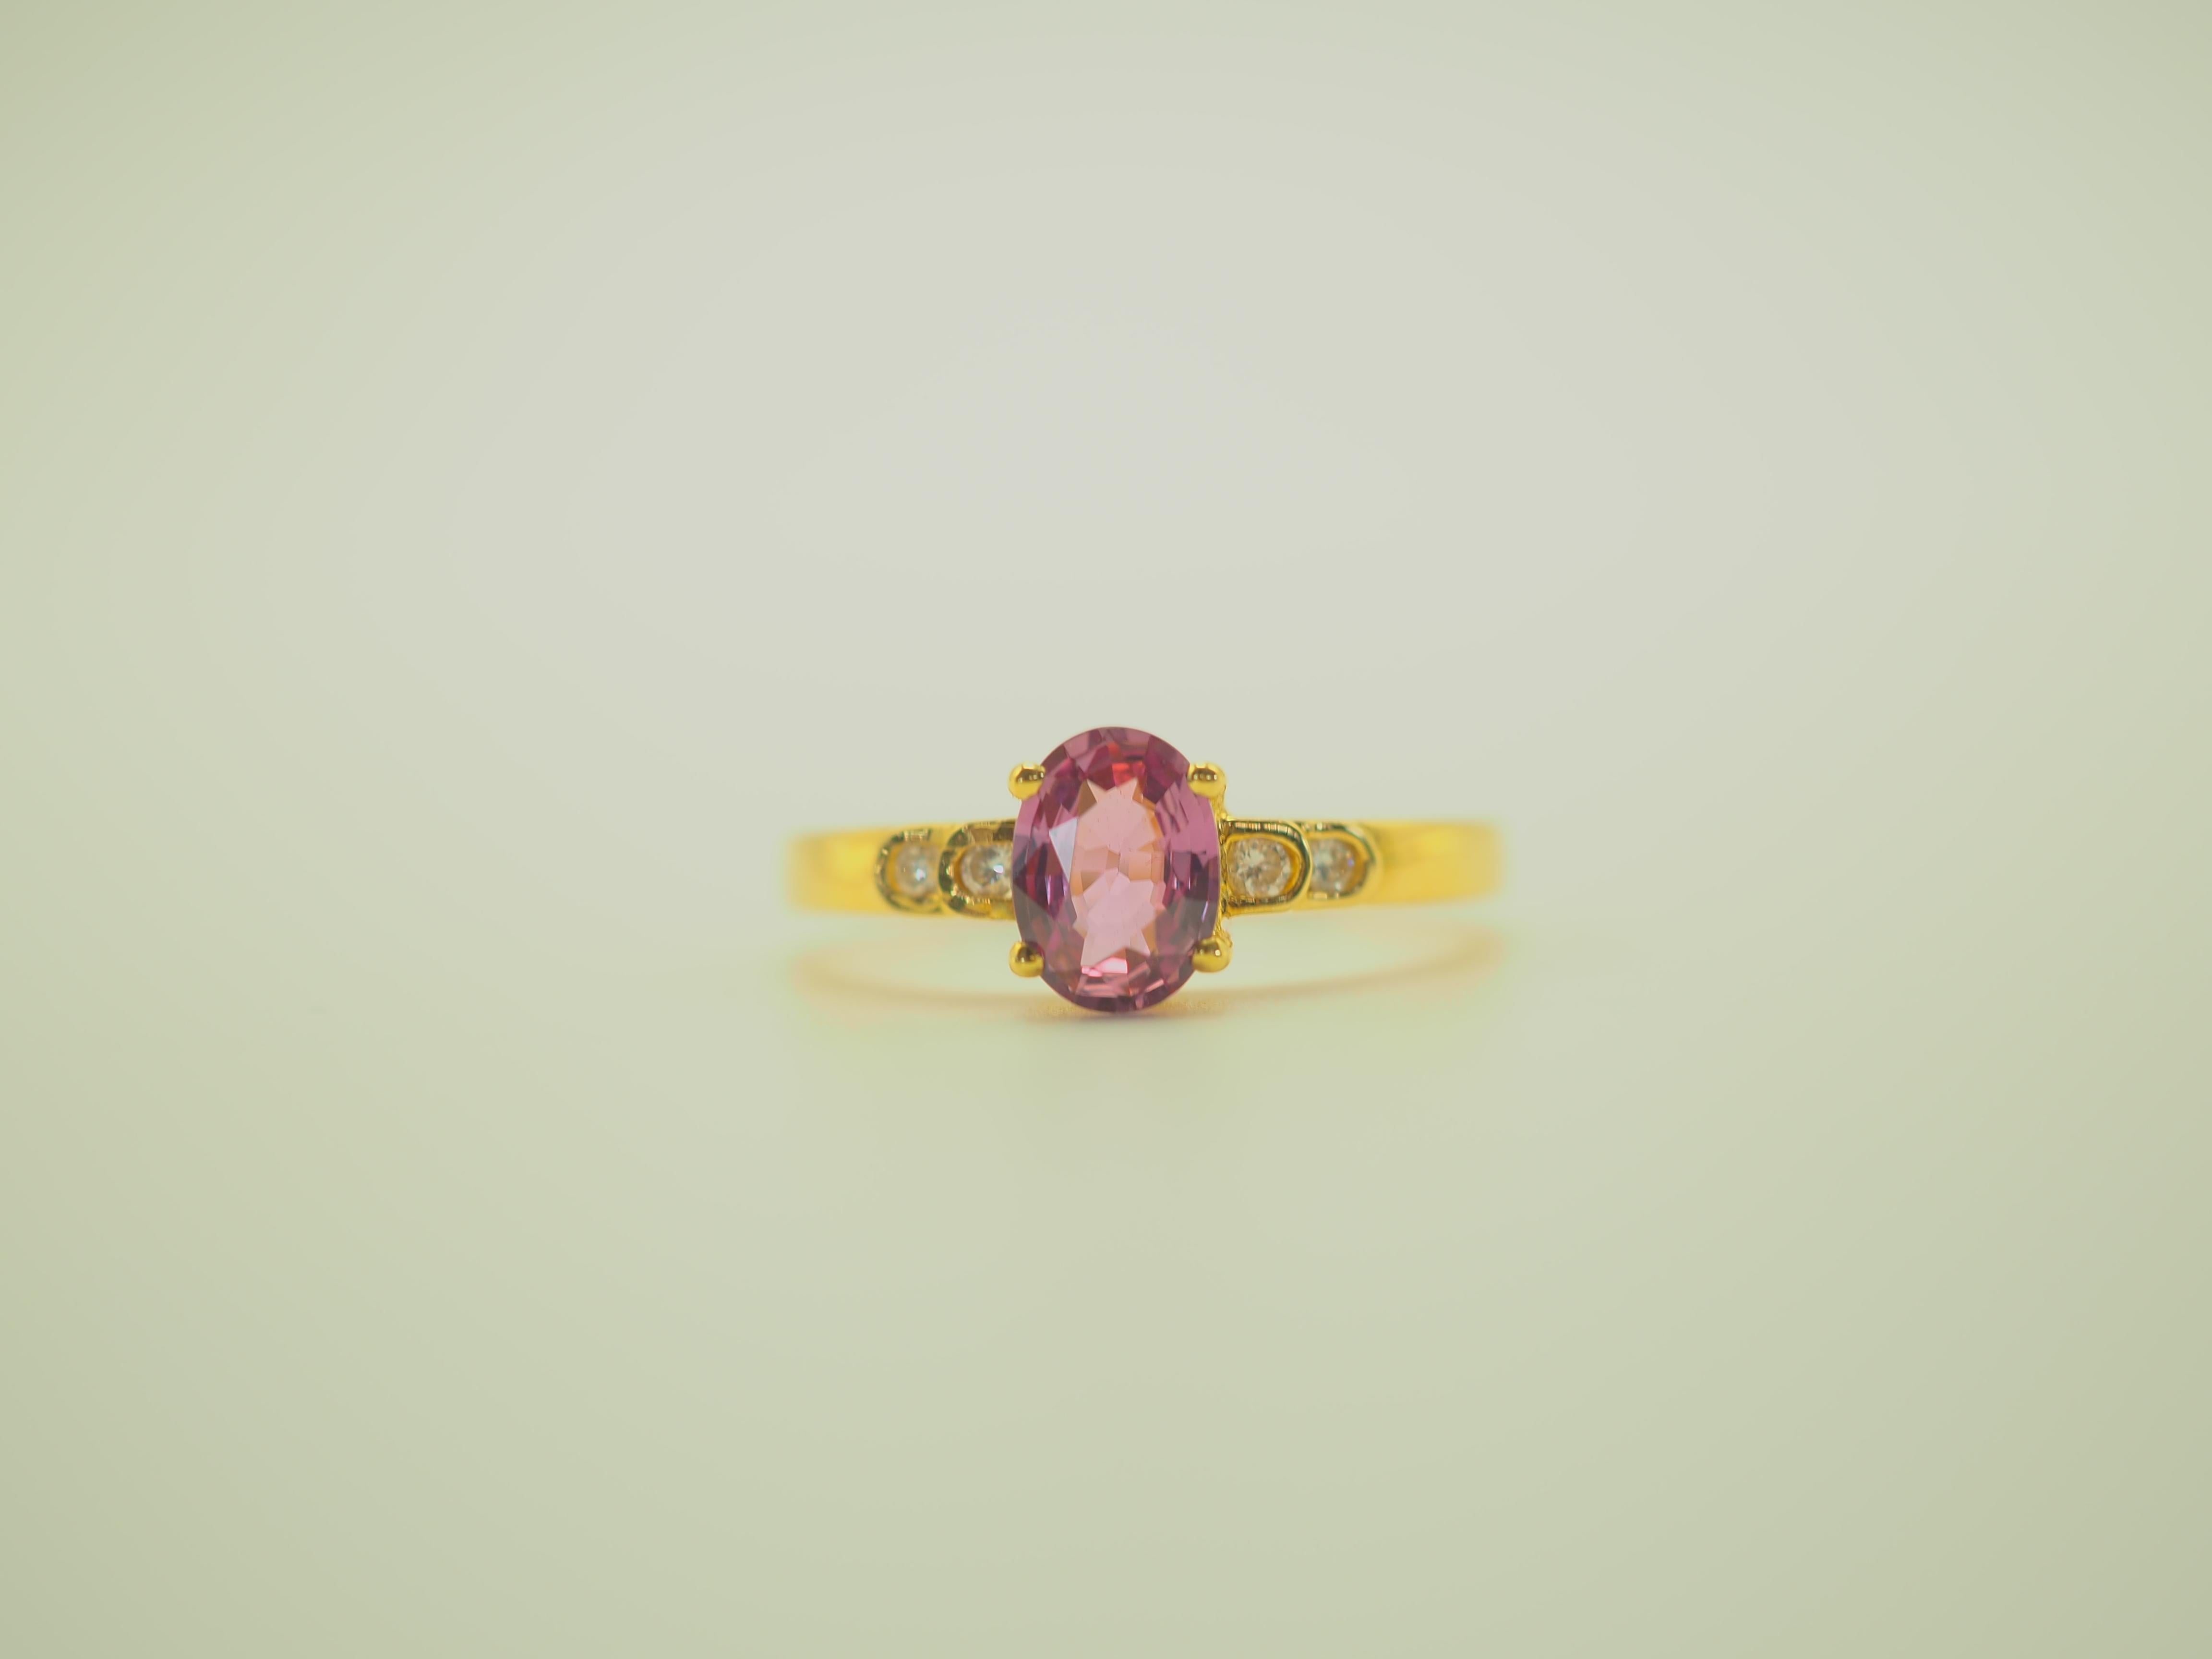 Fine dainty and precious engagement ring in 18k solid yellow gold. The main gemstone is the rare and prized pink colored oval sapphire, flawless and highly saturated. The diamonds are 4 stones and is very clear, bright and lively which adds to the